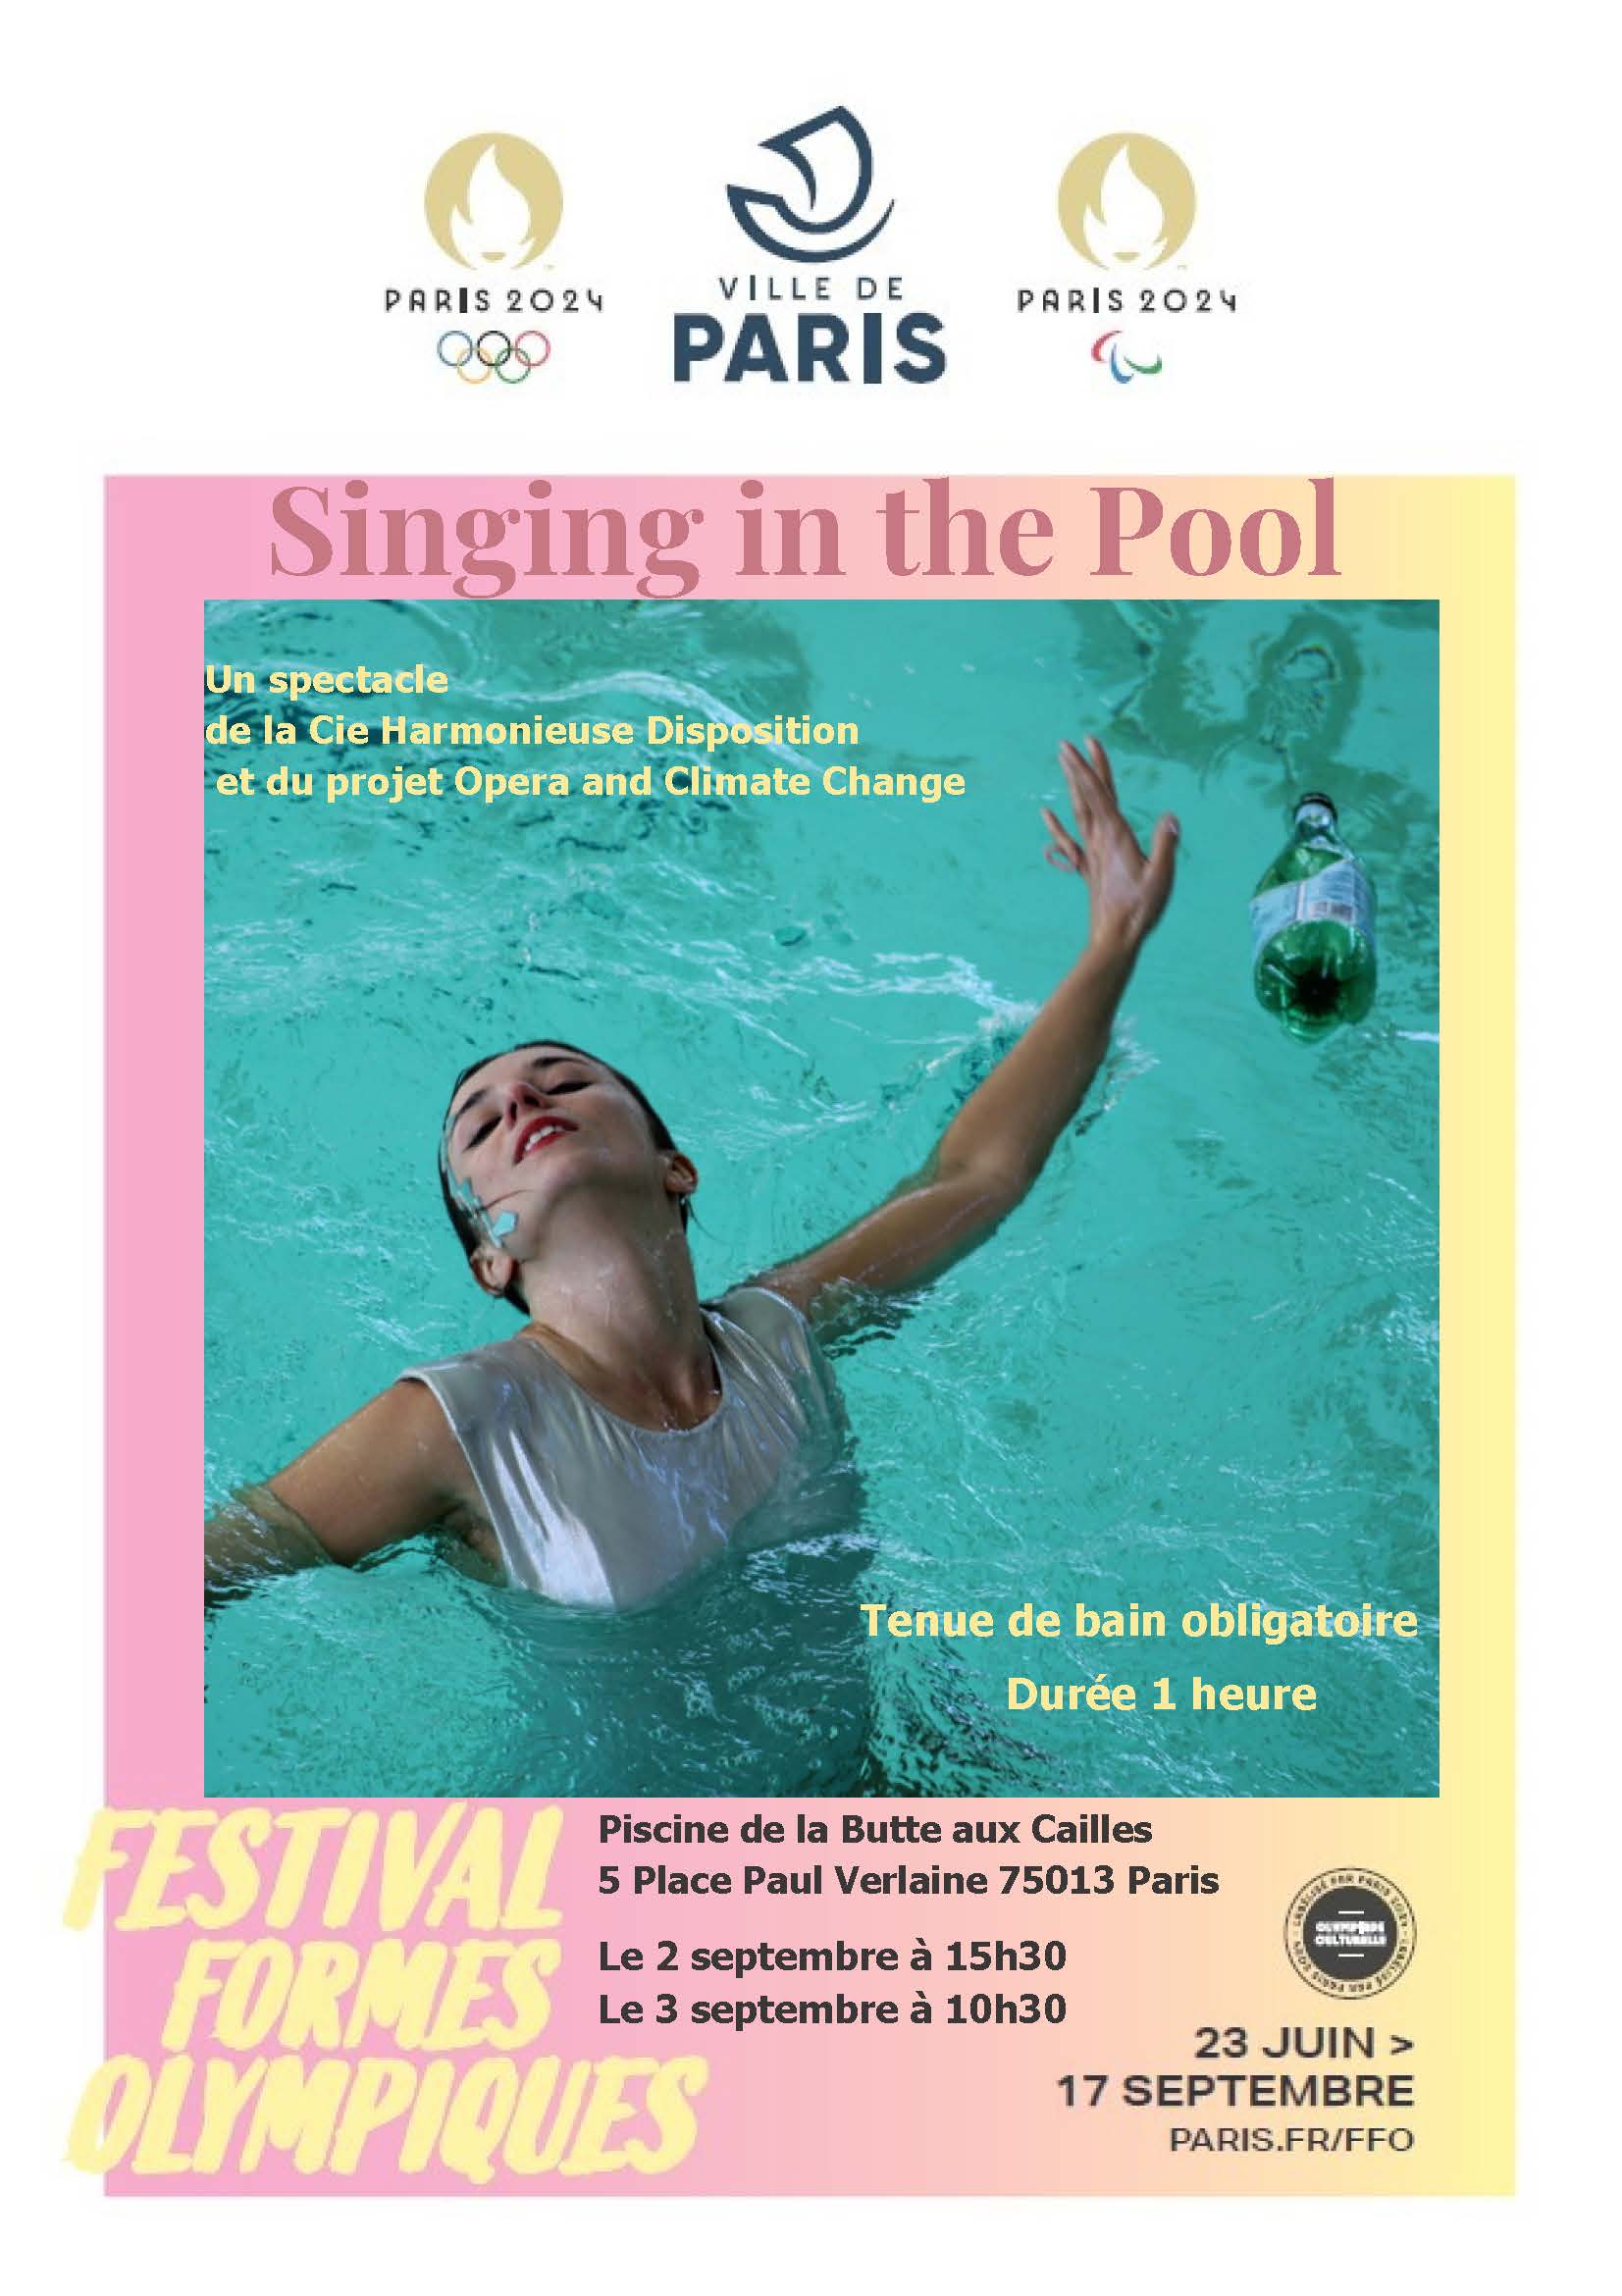 Singing in the pool